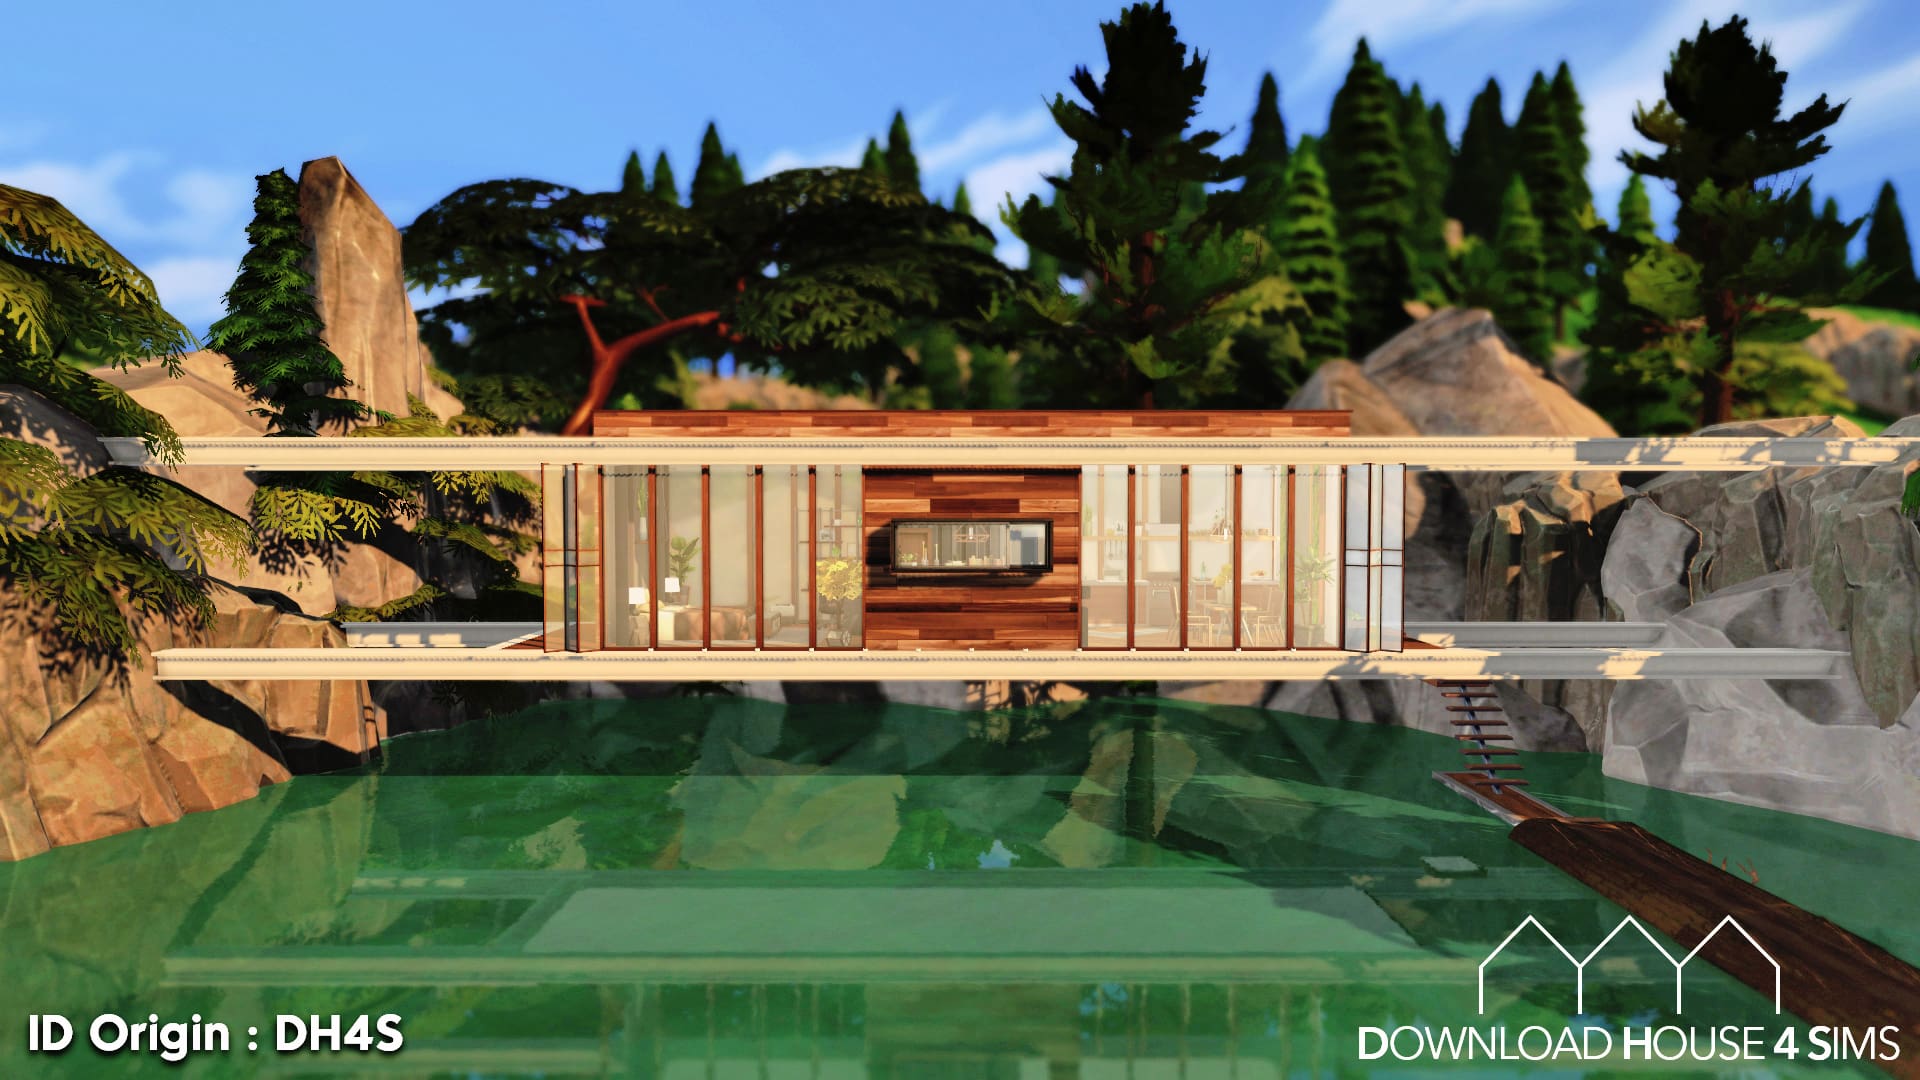 Download House for sims - suspended modern house